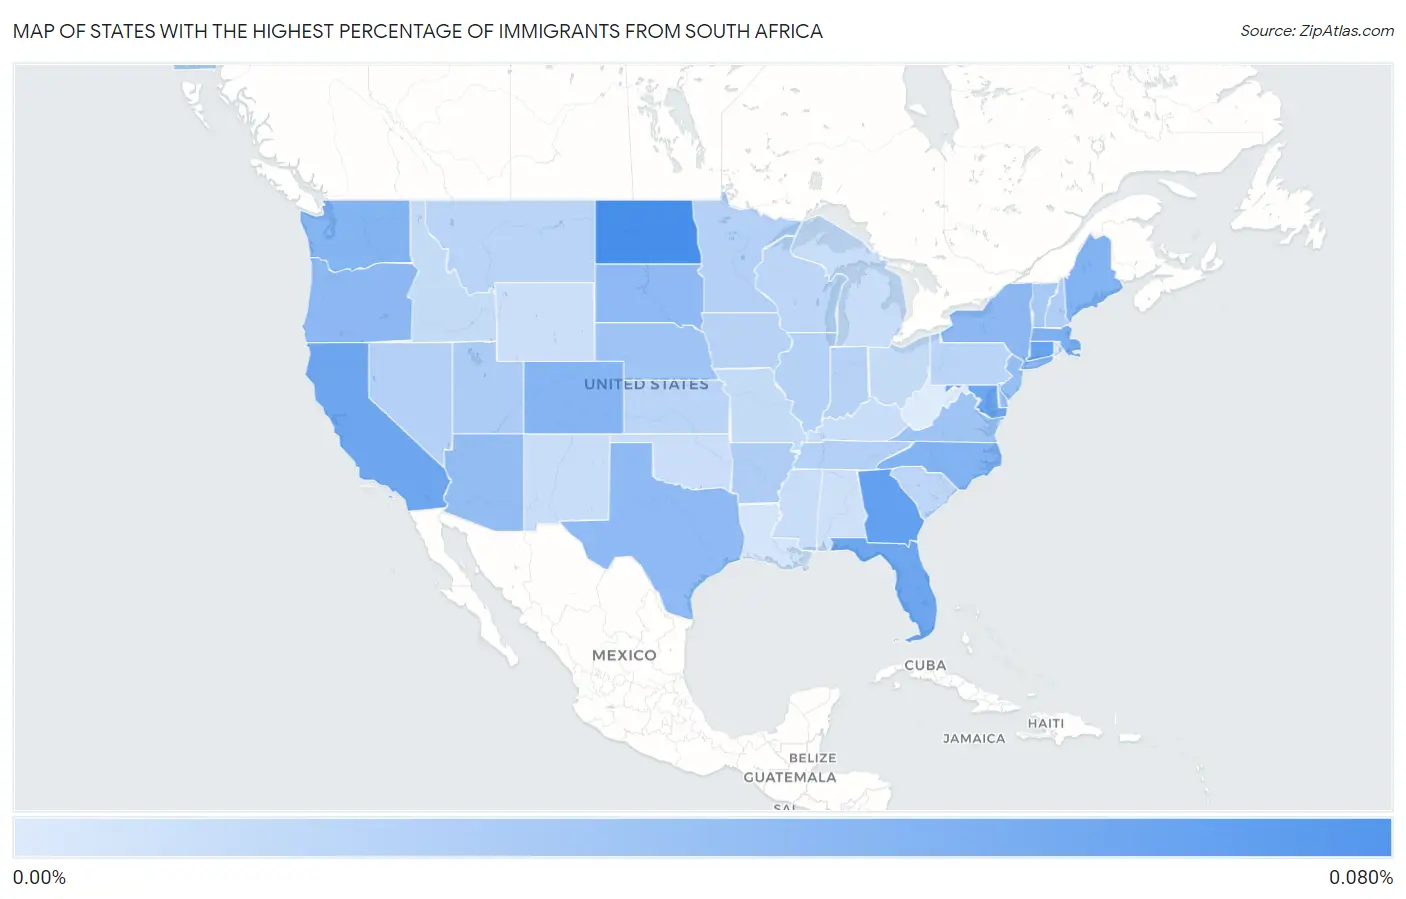 States with the Highest Percentage of Immigrants from South Africa in the United States Map